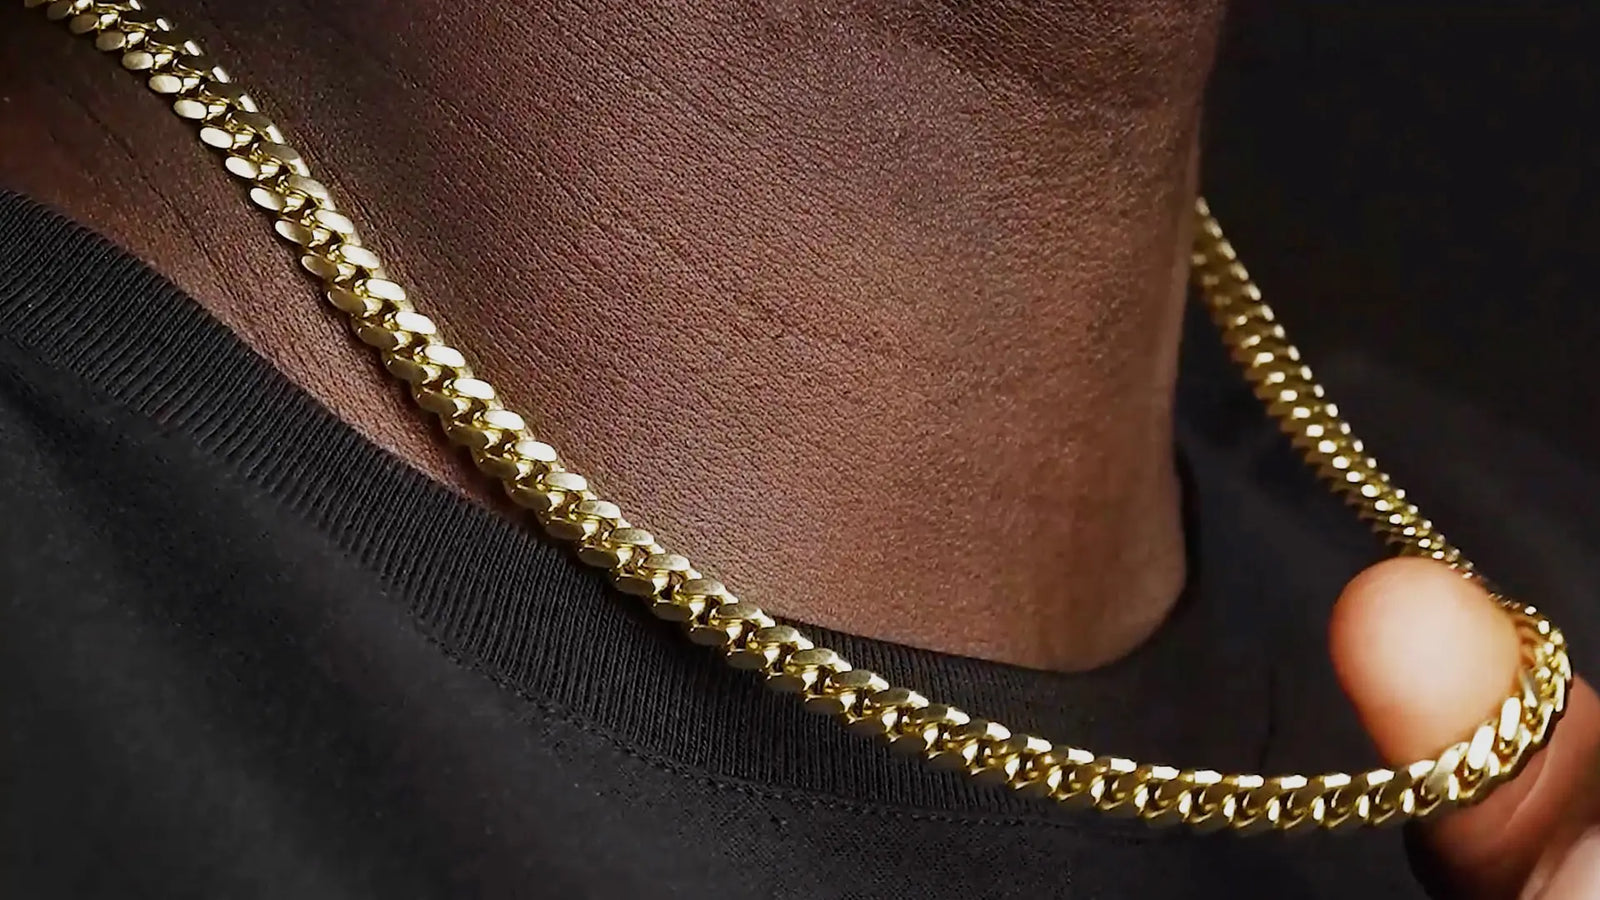 The Gold Gods 8mm Miami Cuban Gold Link Chain Necklace